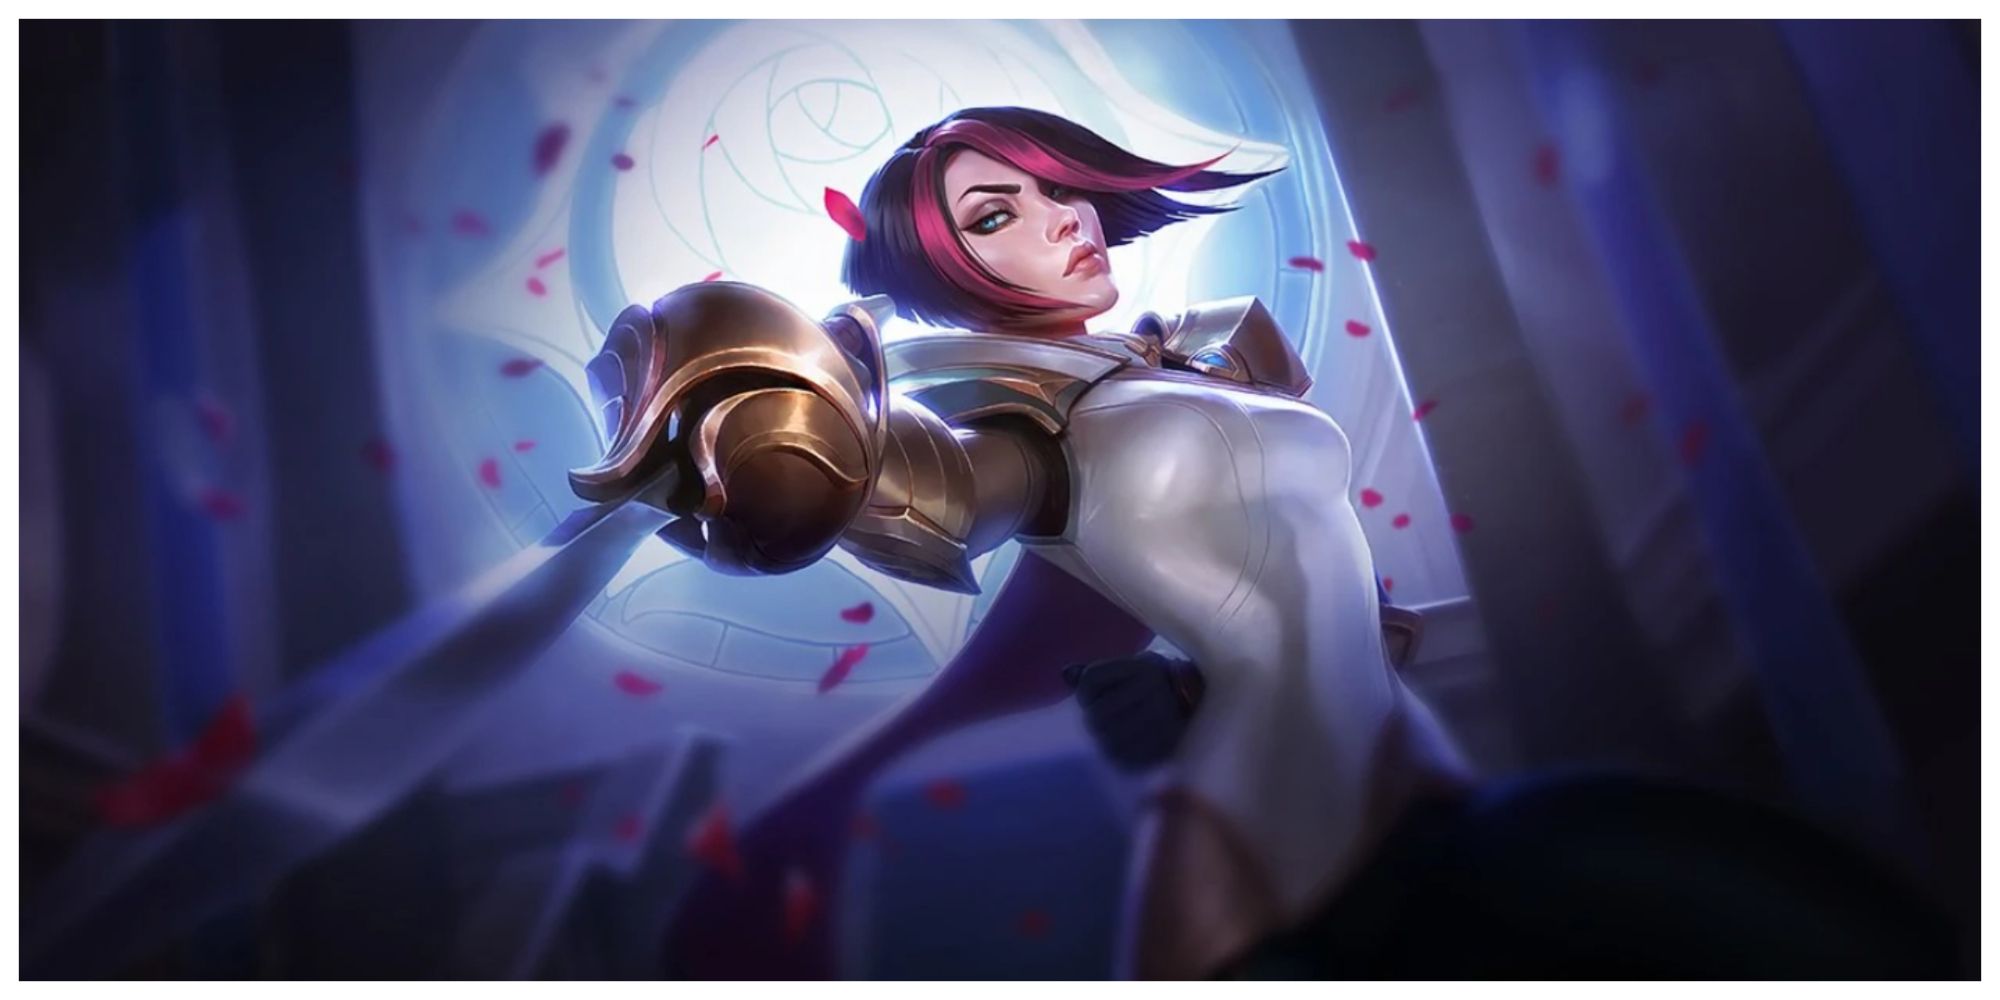 Fiora, standing with one hand behind her back as she brandishes her fencing sword, flower petals falling behind her